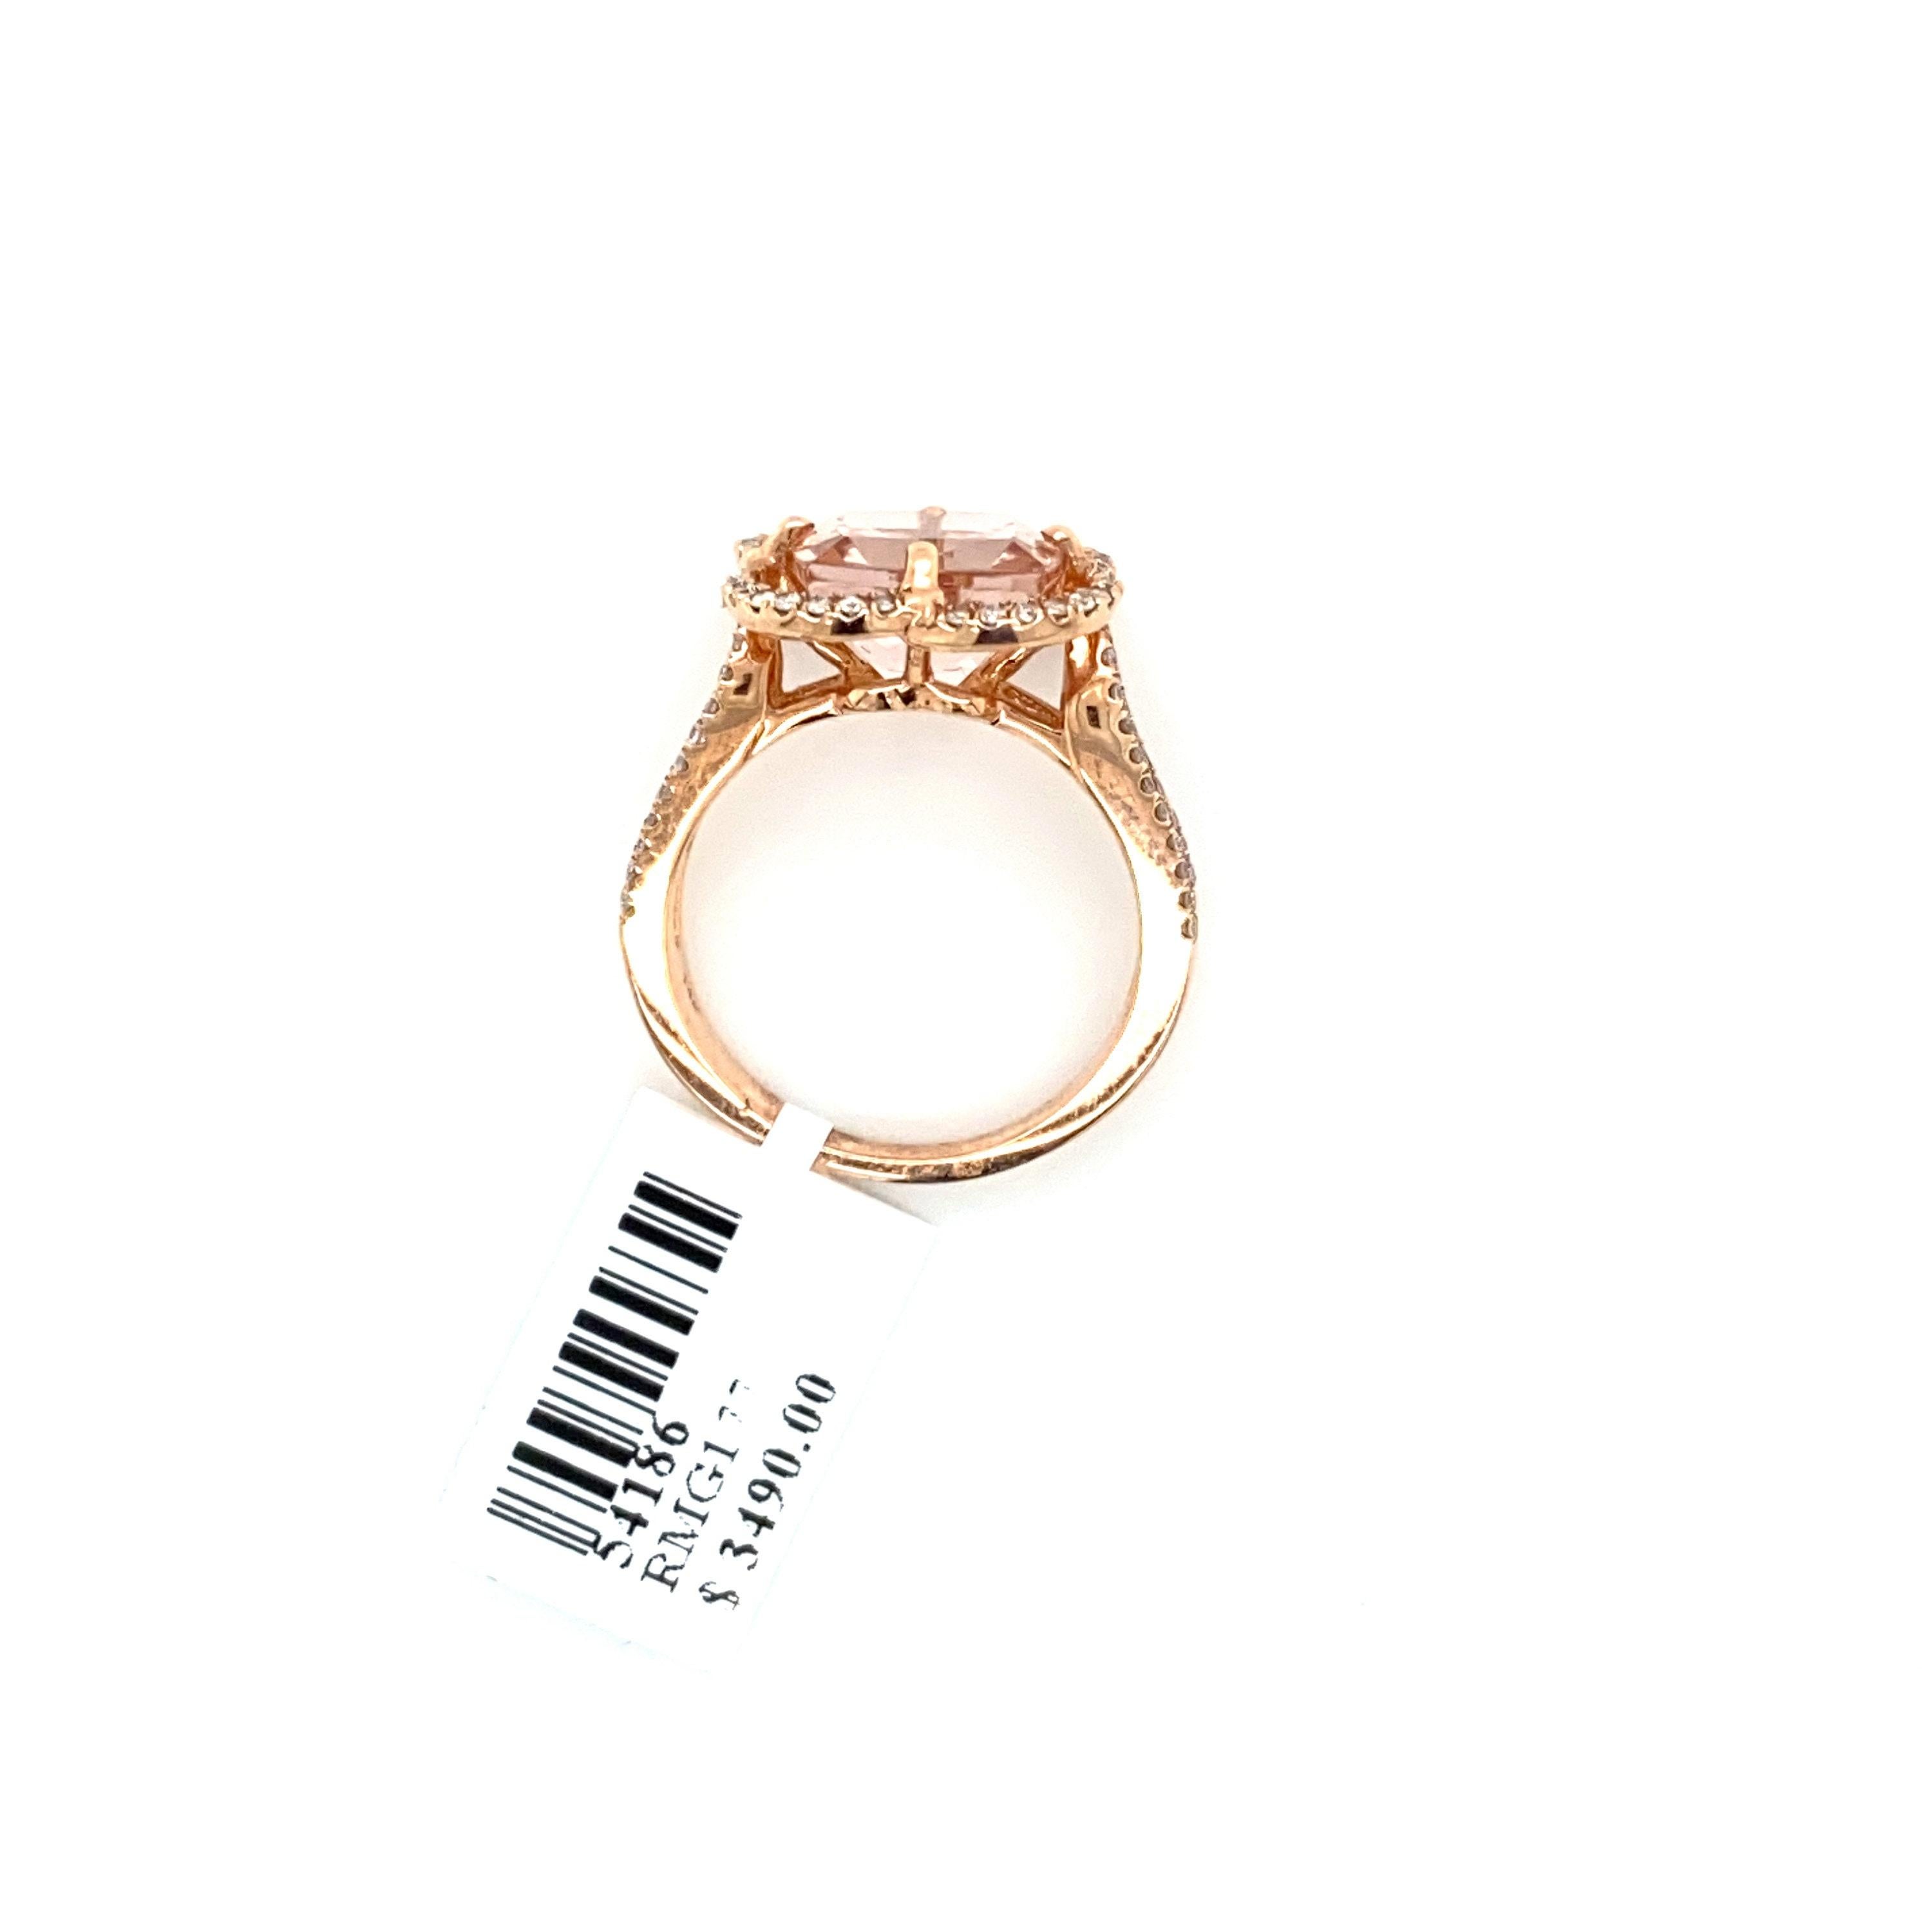 This is a stunning natural 3.85carat morganite and clover shaped diamond halo ring set is in solid 14K rose gold. The natural 10MM cushion cut morganite has an excellent peachy pink color (features almost 4 carats of AAA quality morganite) and is